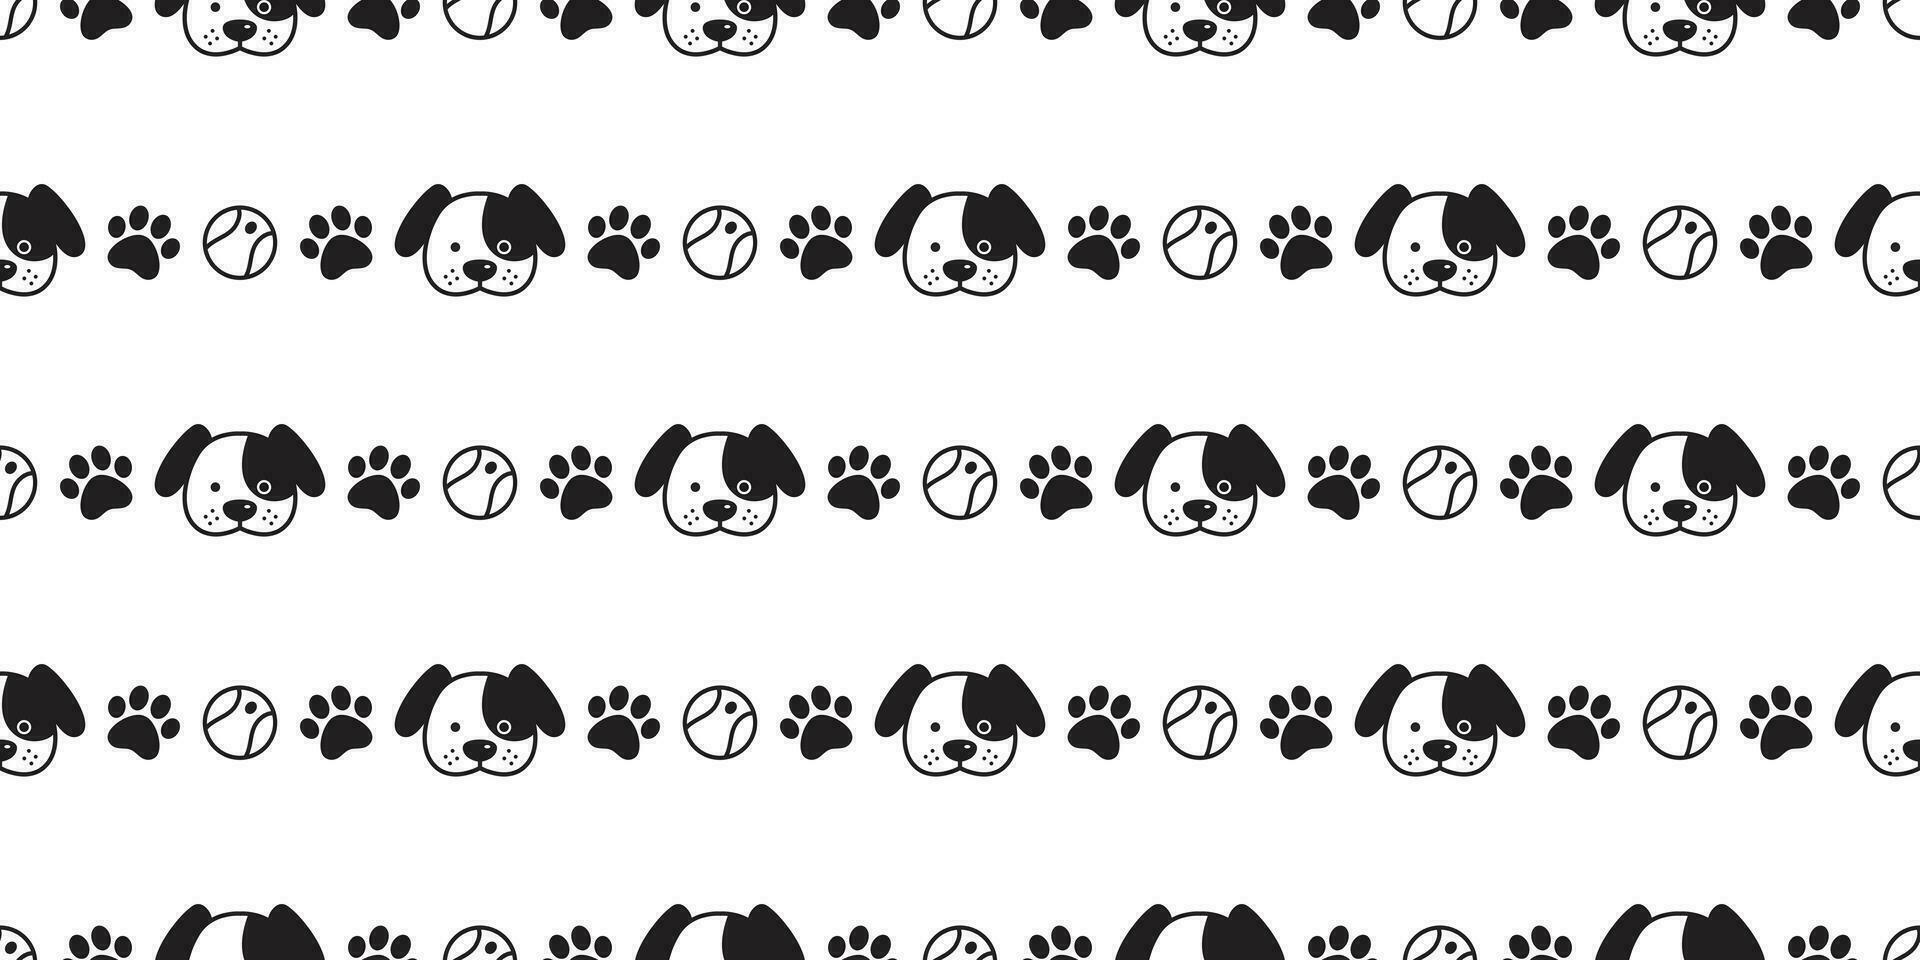 Dog seamless pattern vector french bulldog pet paw footprint ball scarf isolated puppy cartoon illustration tile background repeat wallpaper doodle